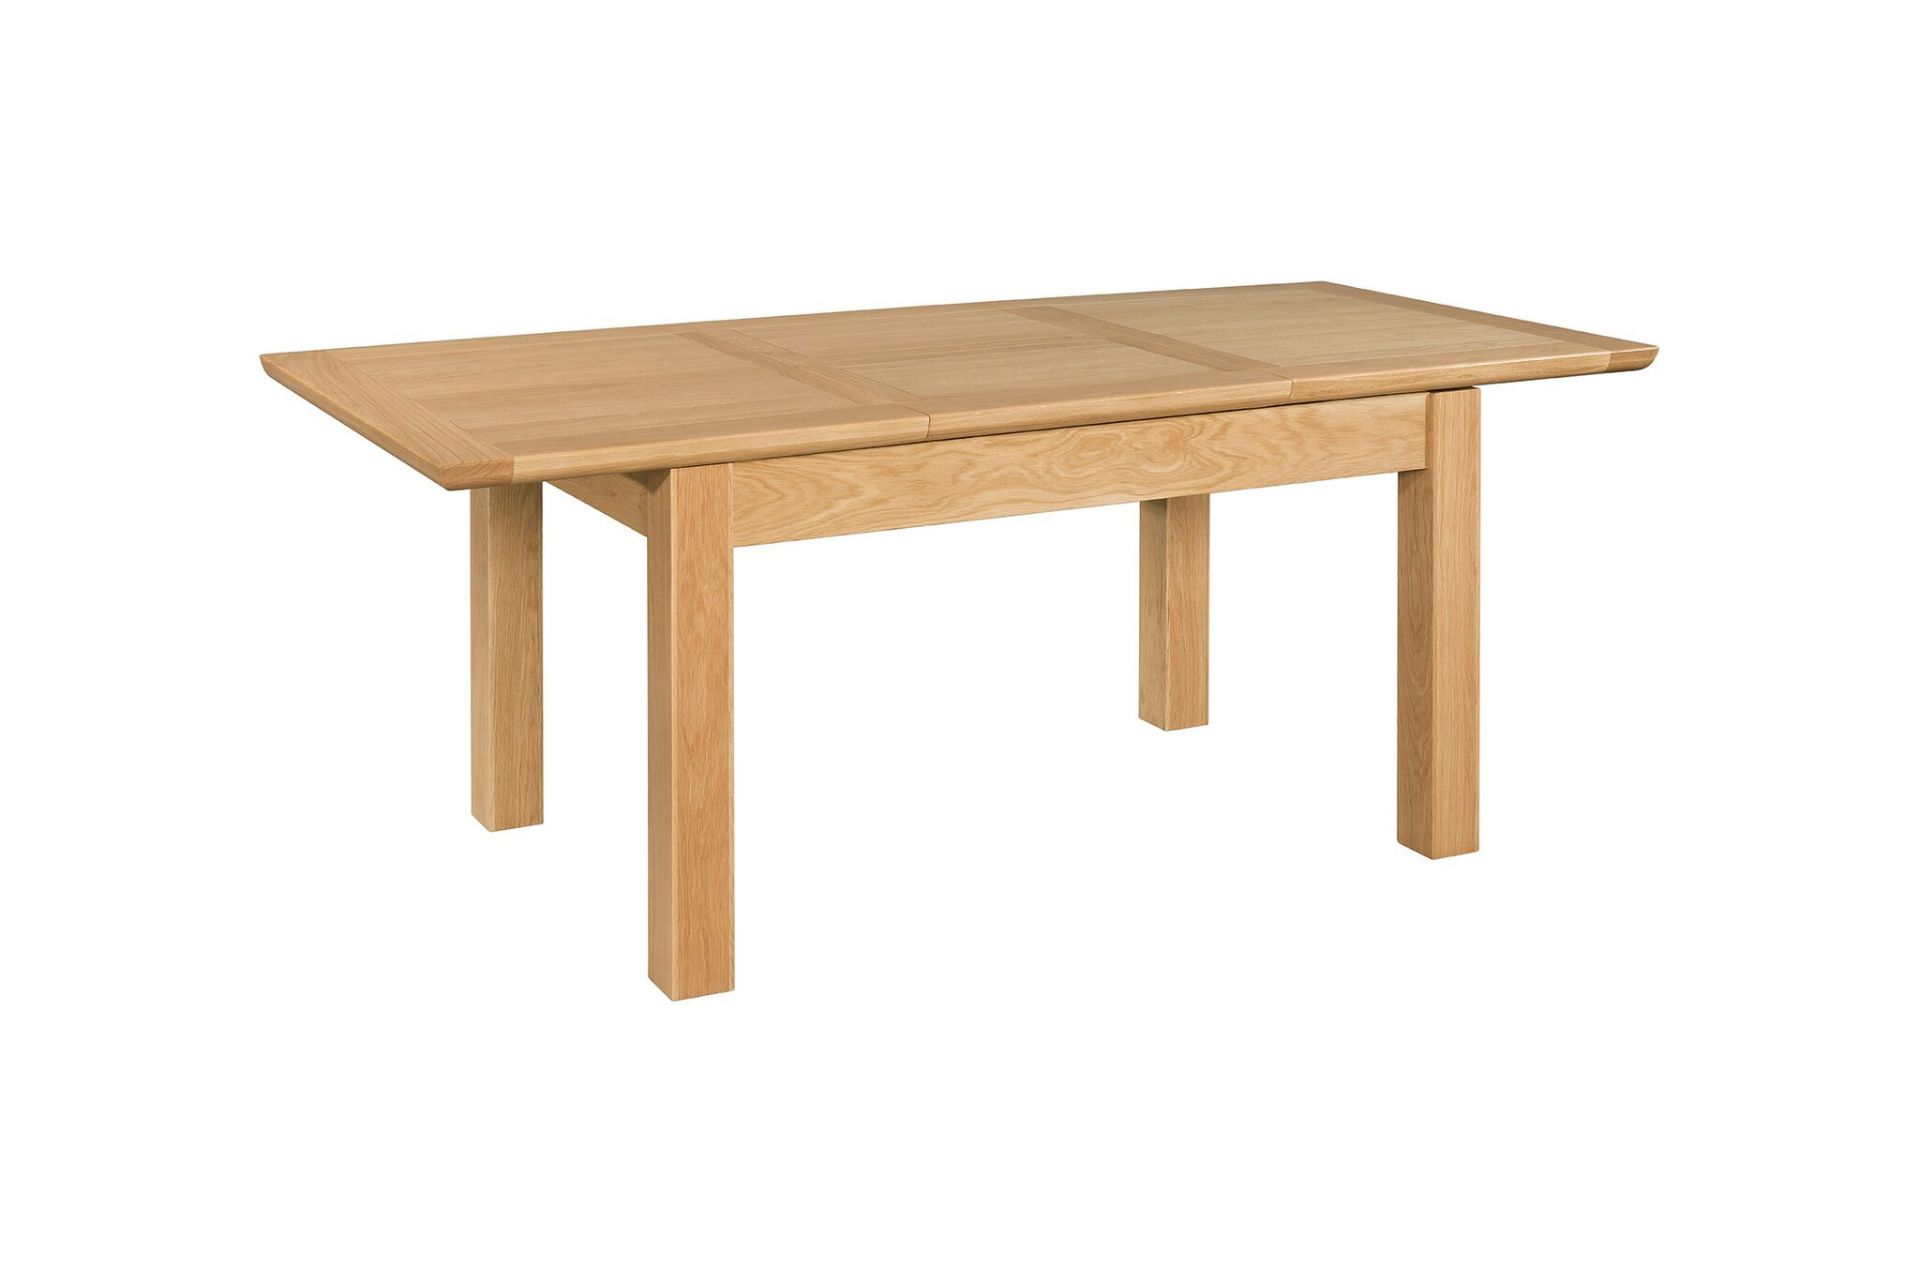 V Brand New Siena 120 x 80 Butterfly Extension Table (extends to 160 cm) 1200-160 x 800 x 760 cms - Image 2 of 2